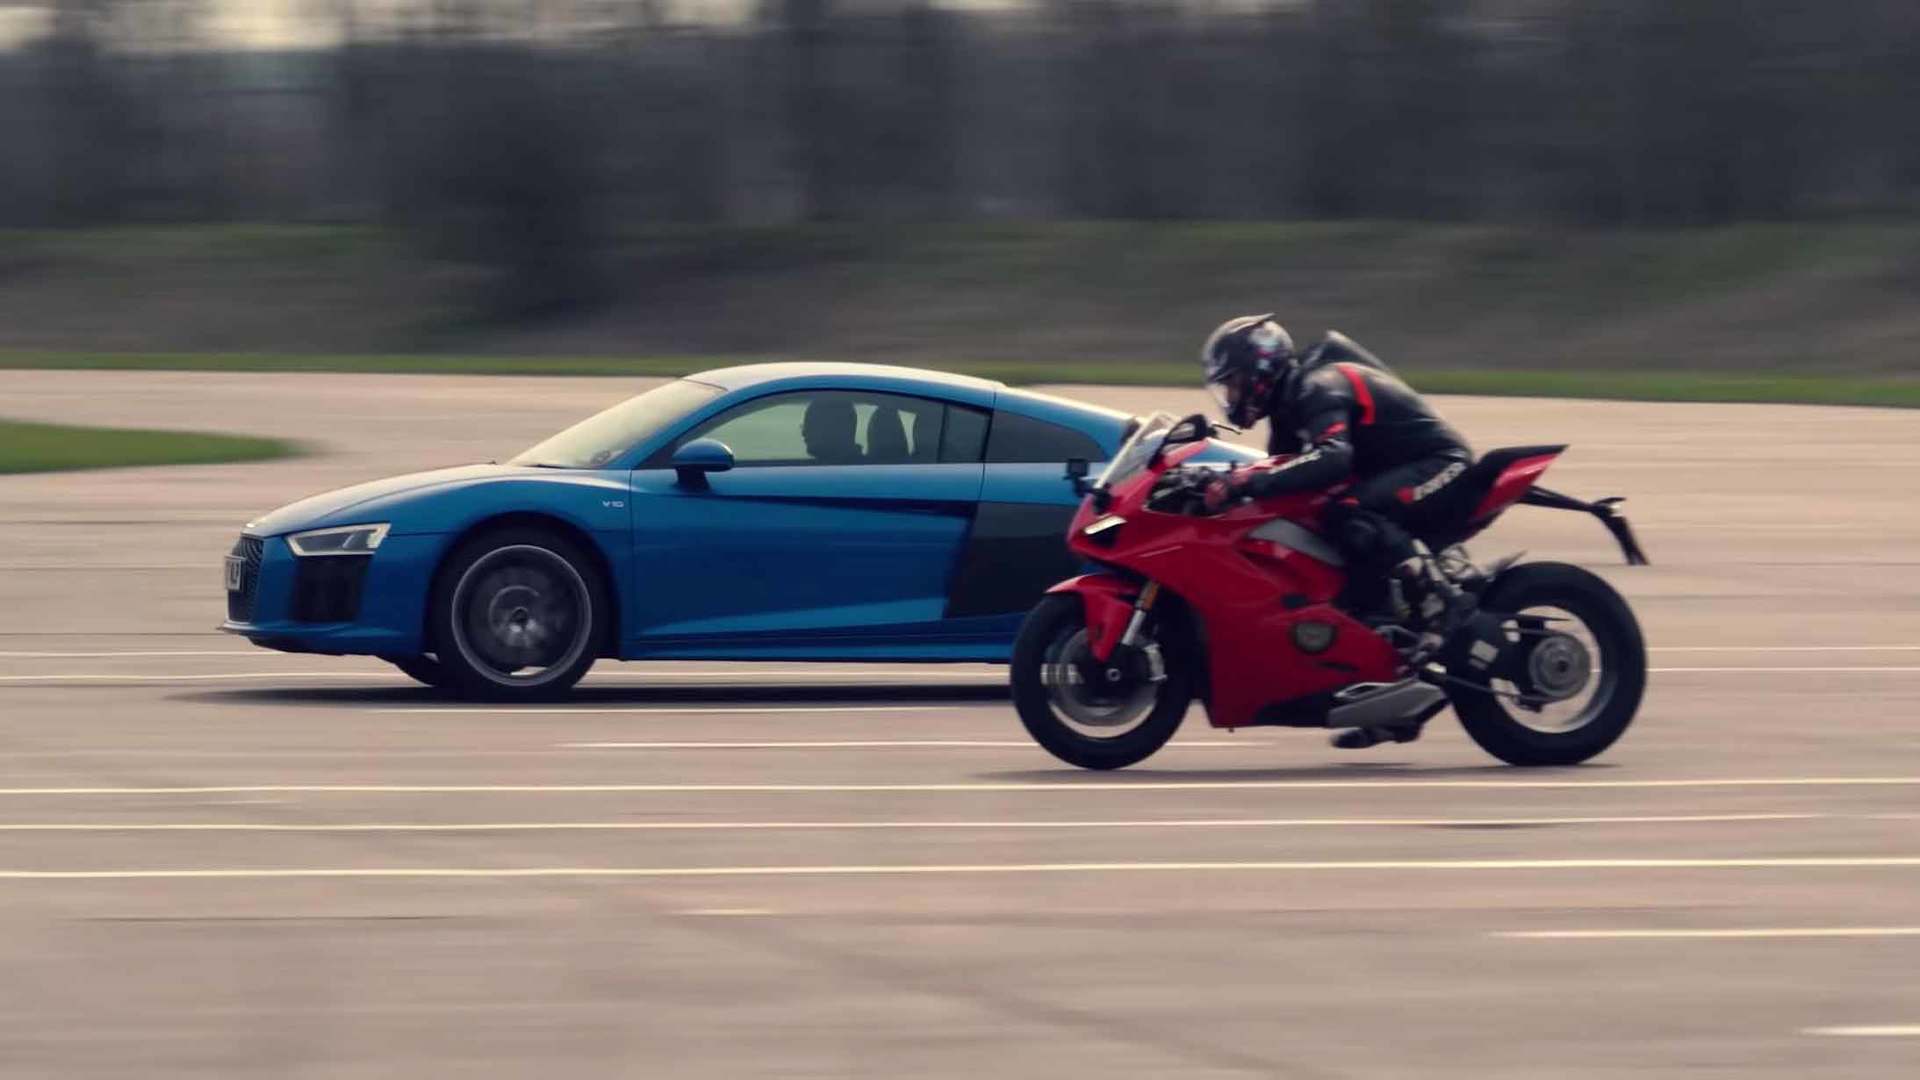 Audi R8 Pitted Against Ducati Panigale V4 In Drag Race